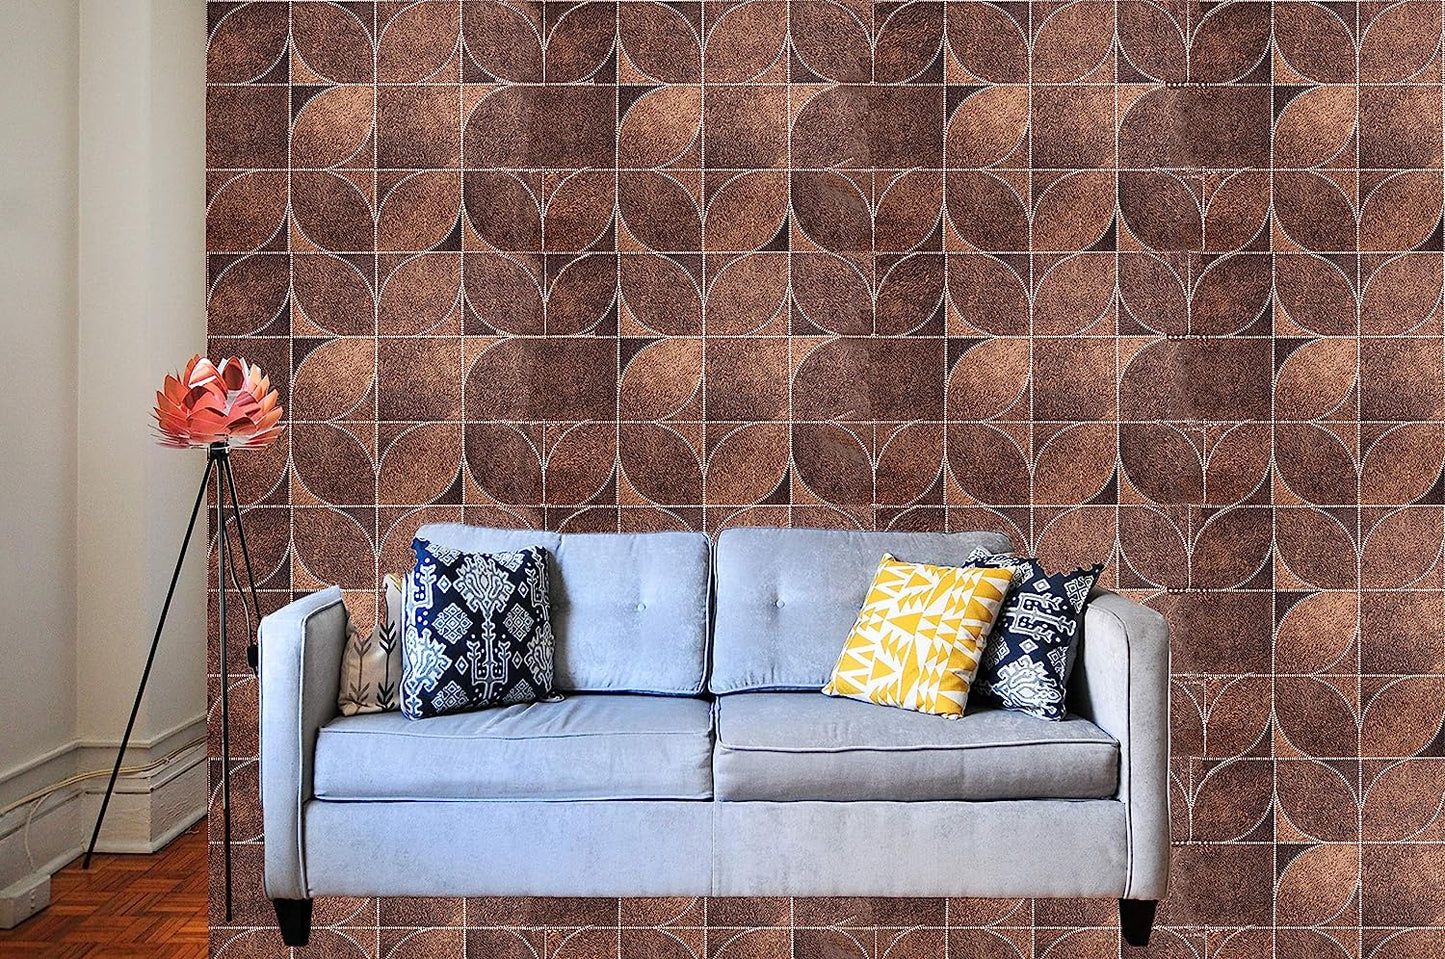 3D Latest American Leather Design Brown Wallpaper Roll for Home Walls 57 Sq Ft (0.53m or 33 Feet)